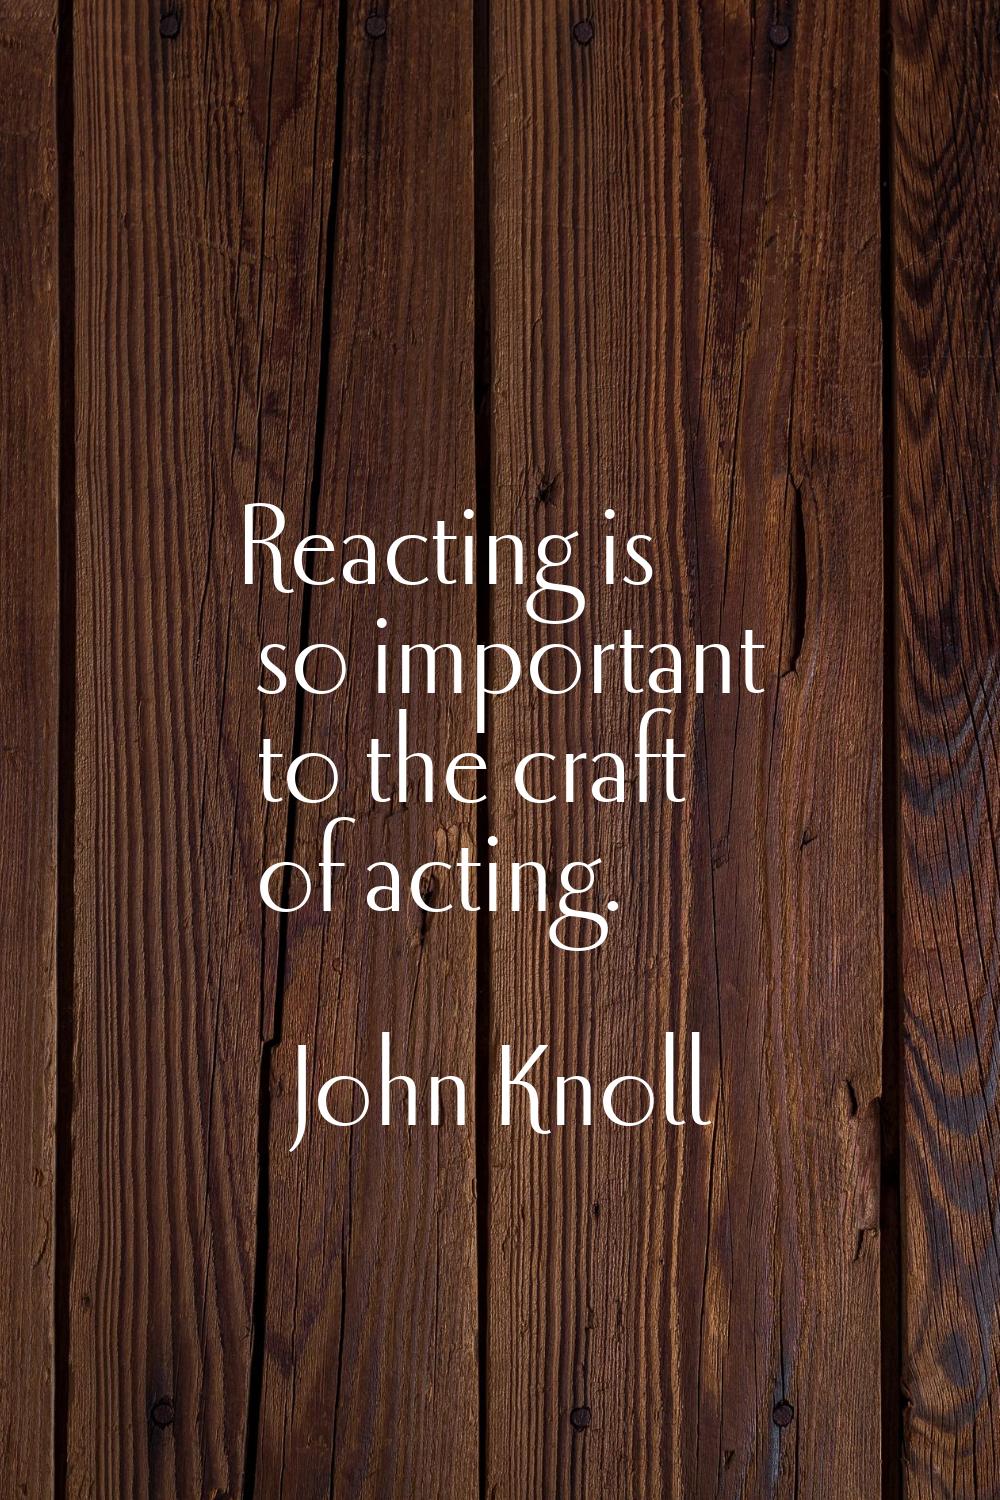 Reacting is so important to the craft of acting.